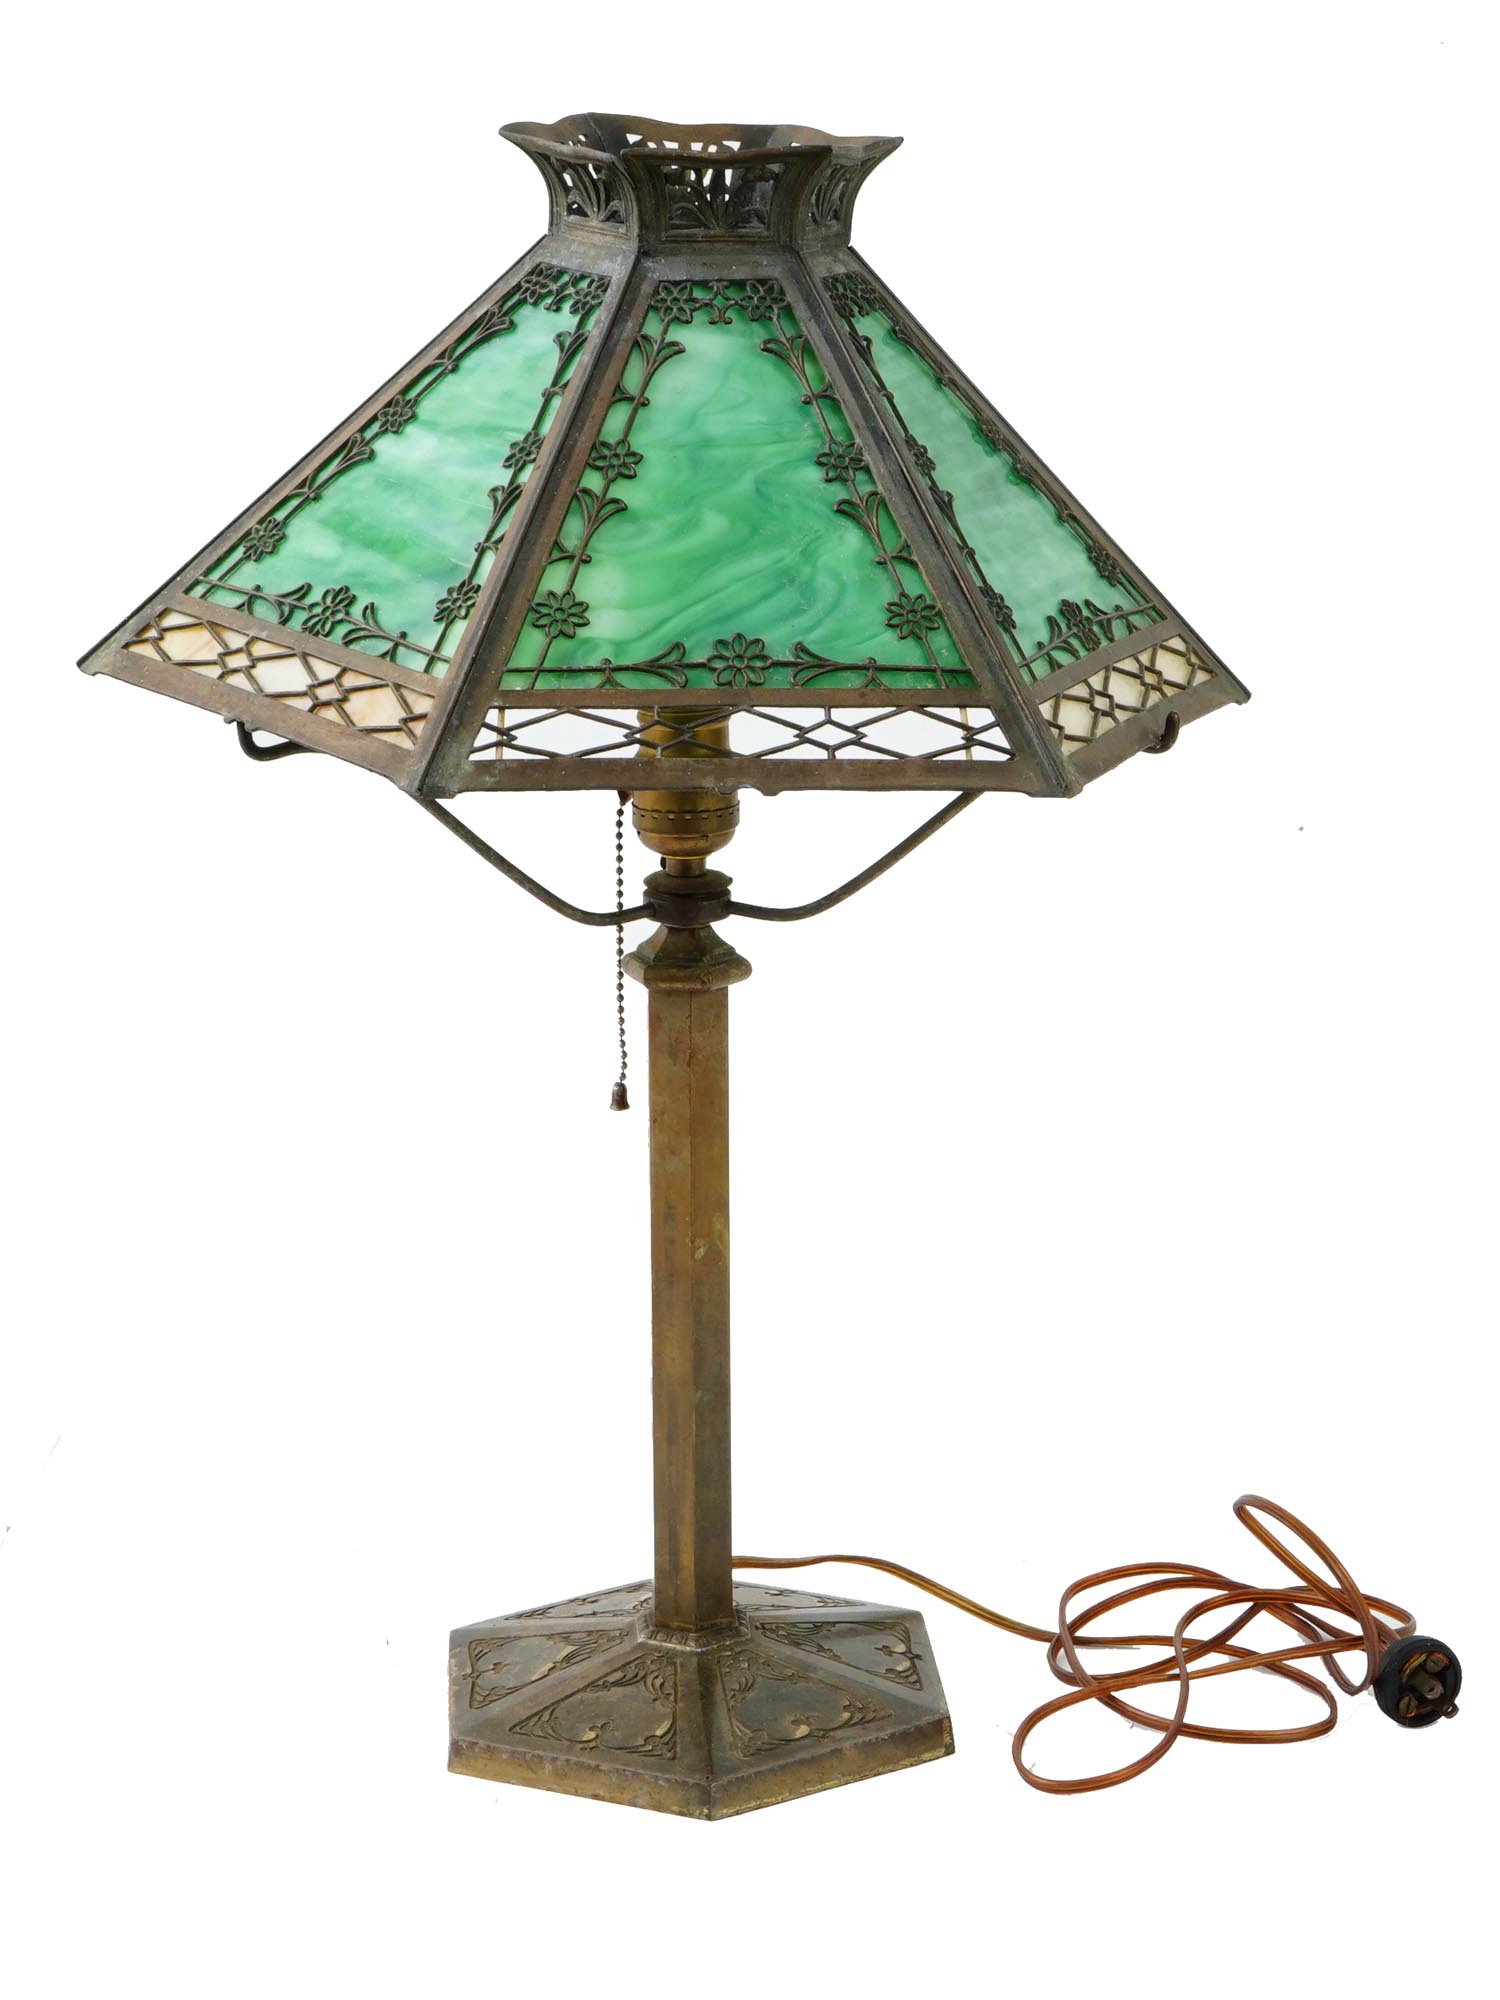 ART NOUVEAU TIFFANY MANNER STAINED GLASS TABLE LAMP PIC-0